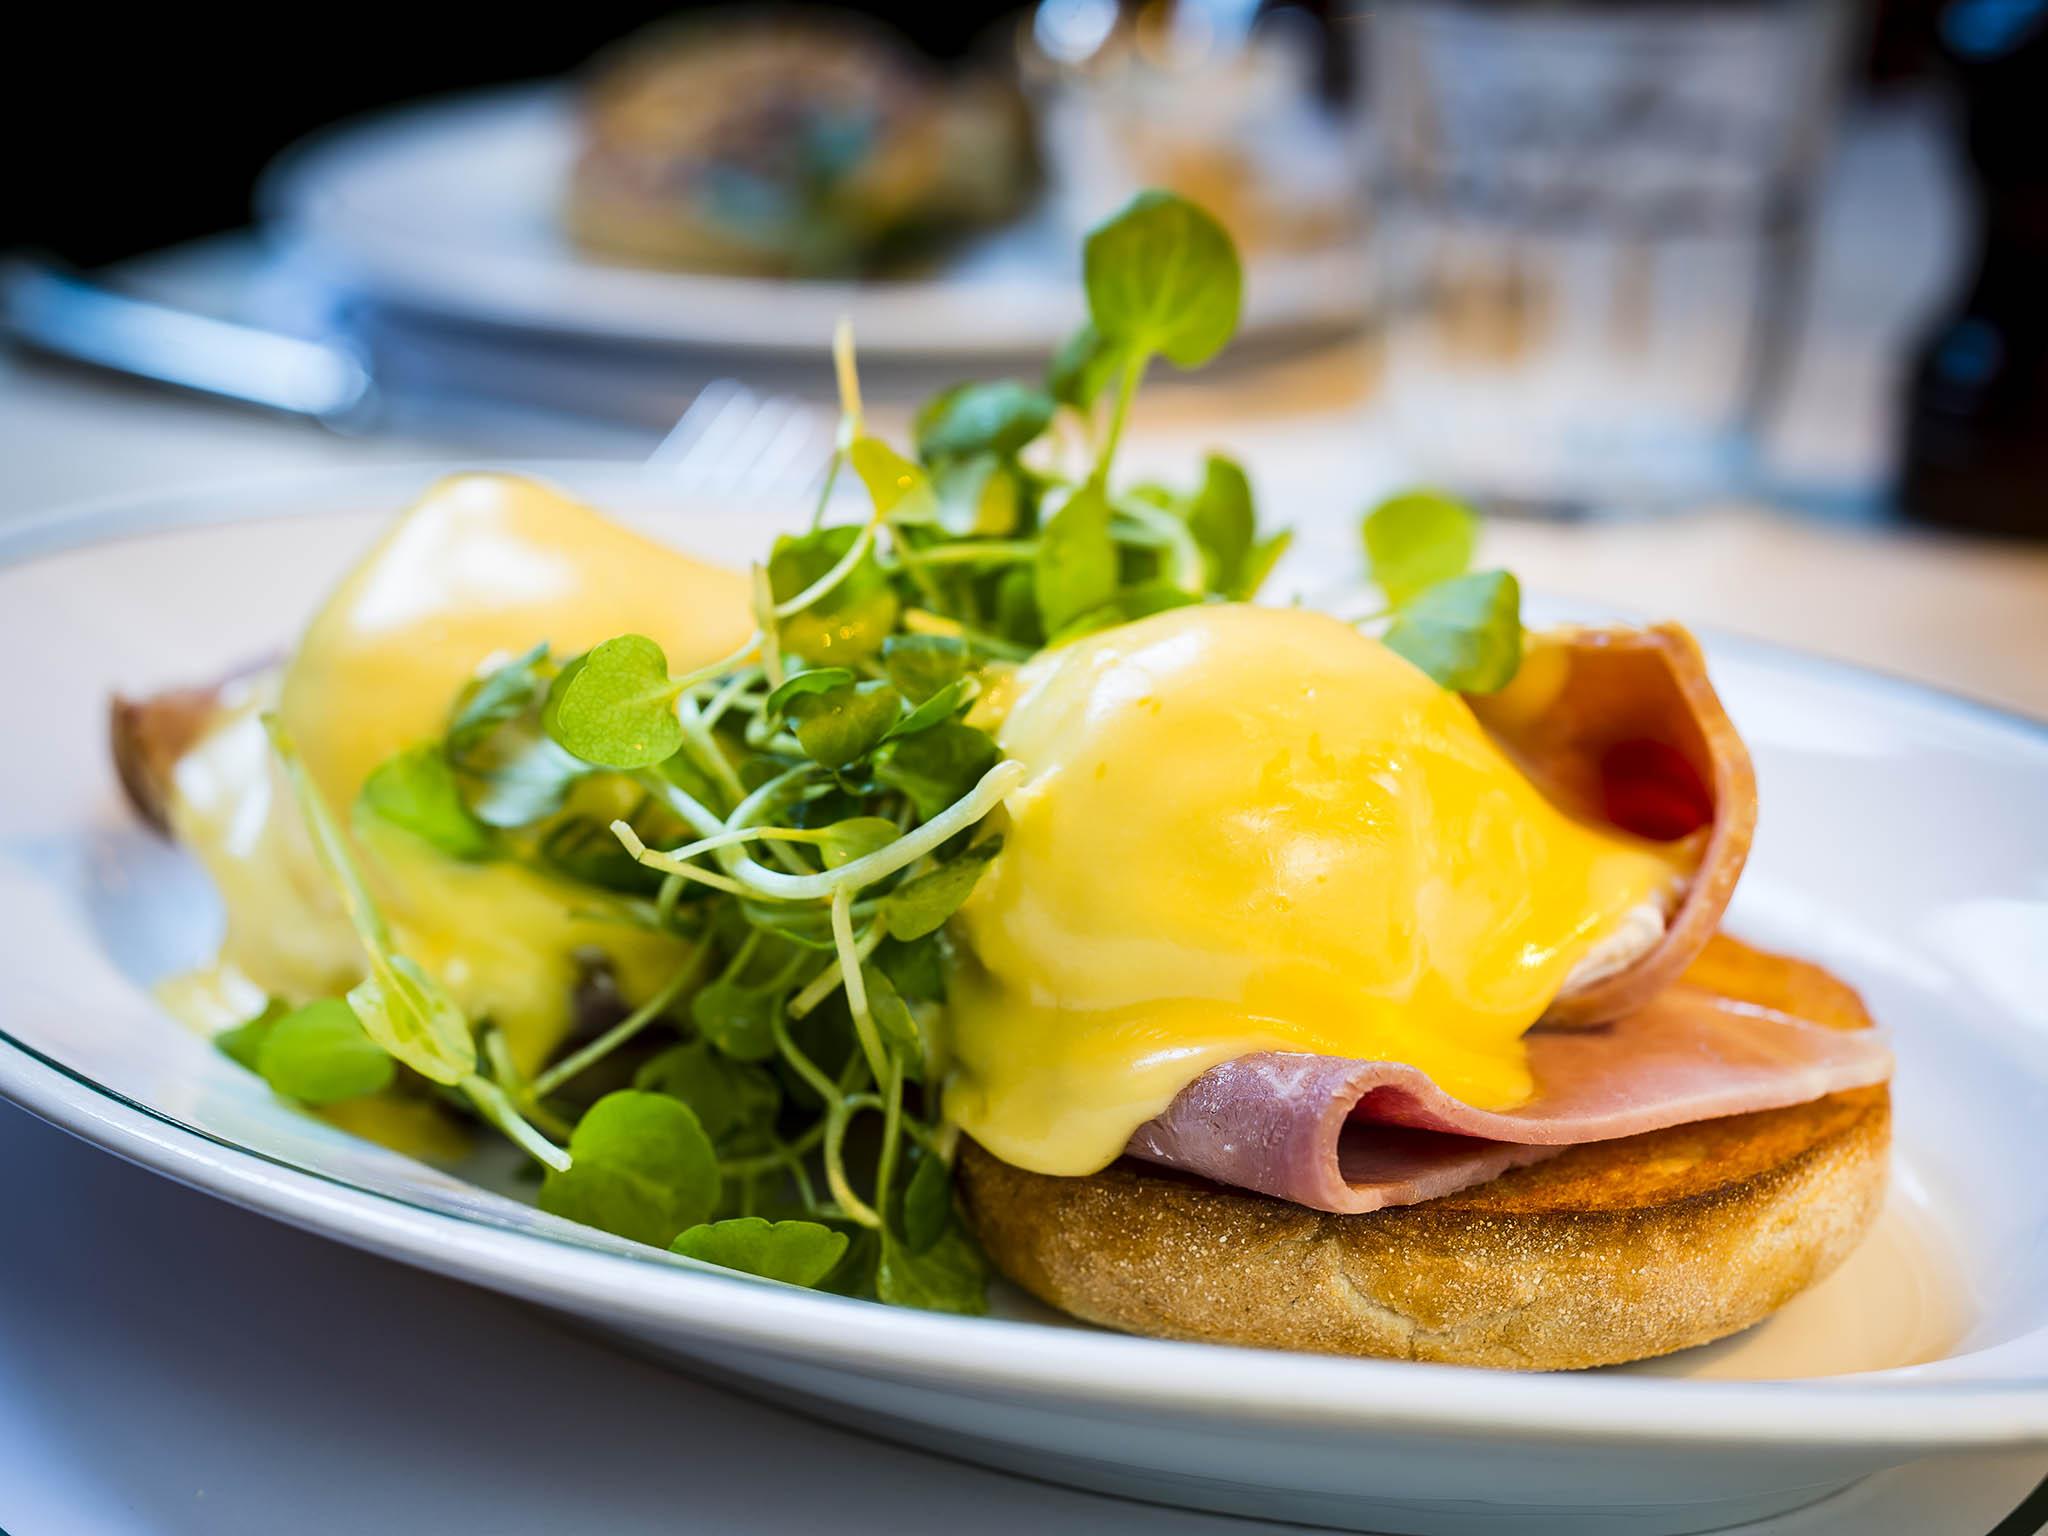 The eggs benedict, which comes with chips (Paul Winch-Furness)